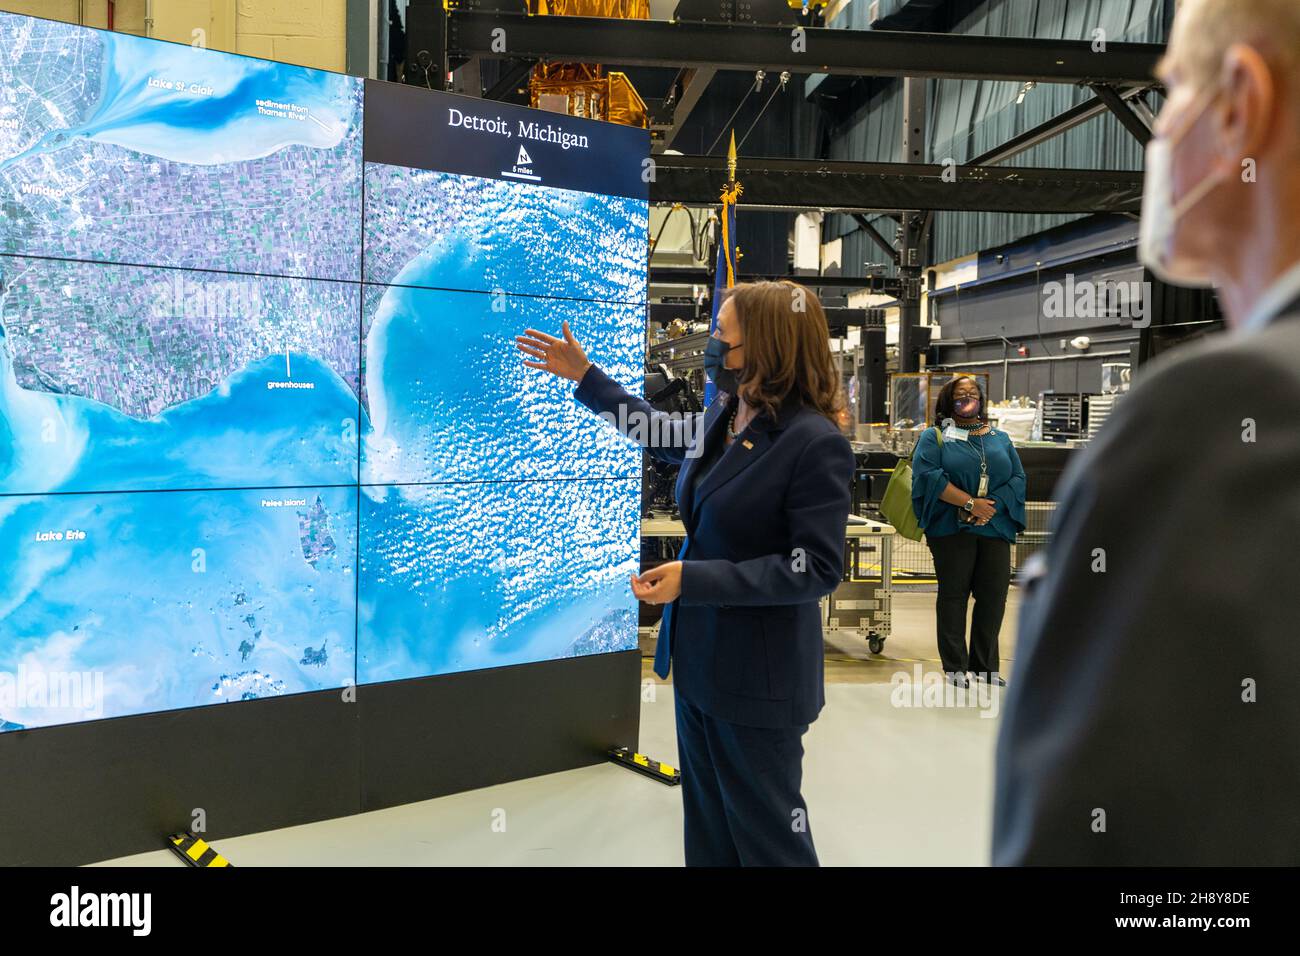 Greenbelt, United States of America. 05 November, 2021. U.S Vice President Kamala Harris asks a question on data visualizations and Earth Science implications of current satellite missions using the Hyperwall inside Goddard Space Flight Center, November 5, 2021 in Greenbelt, Maryland.  Credit: Taylor Mickal/NASA/Alamy Live News Stock Photo